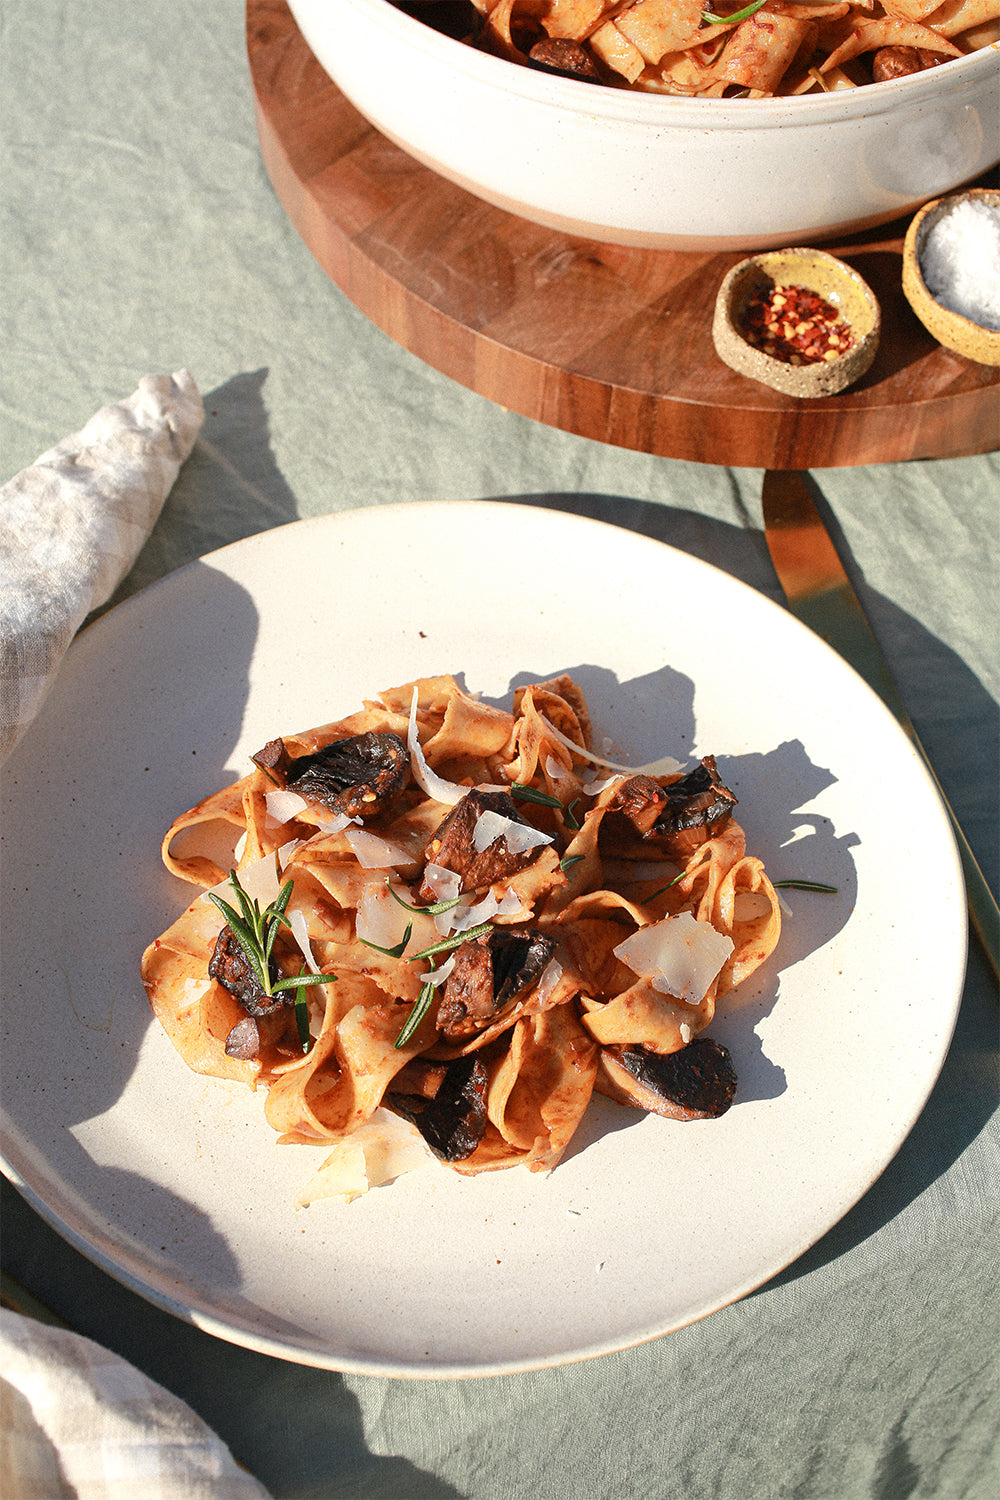 Warm Up Your Winter with this Nourishing Pappardelle Pasta Recipe